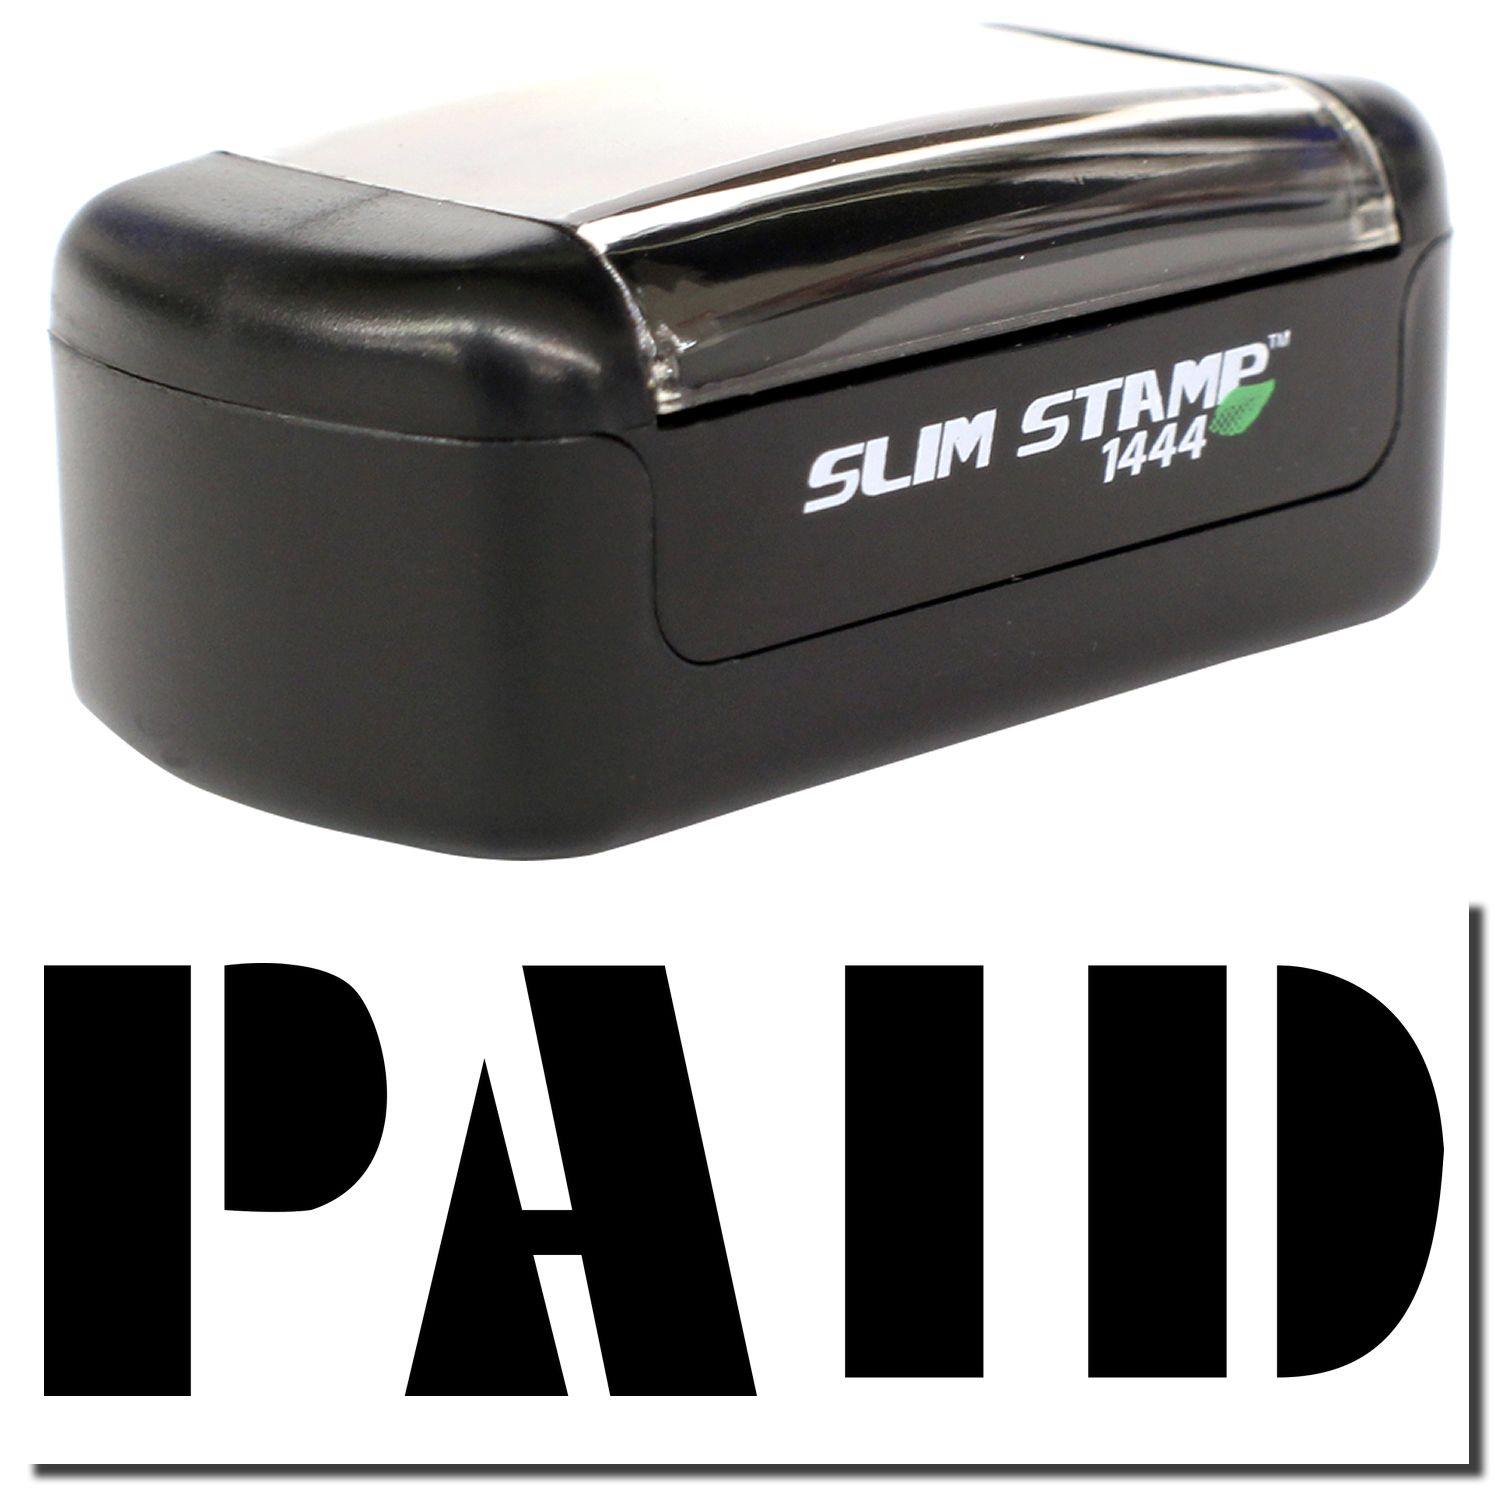 A stock office pre-inked stamp with a stamped image showing how the text "PAID" in bold font is displayed after stamping.